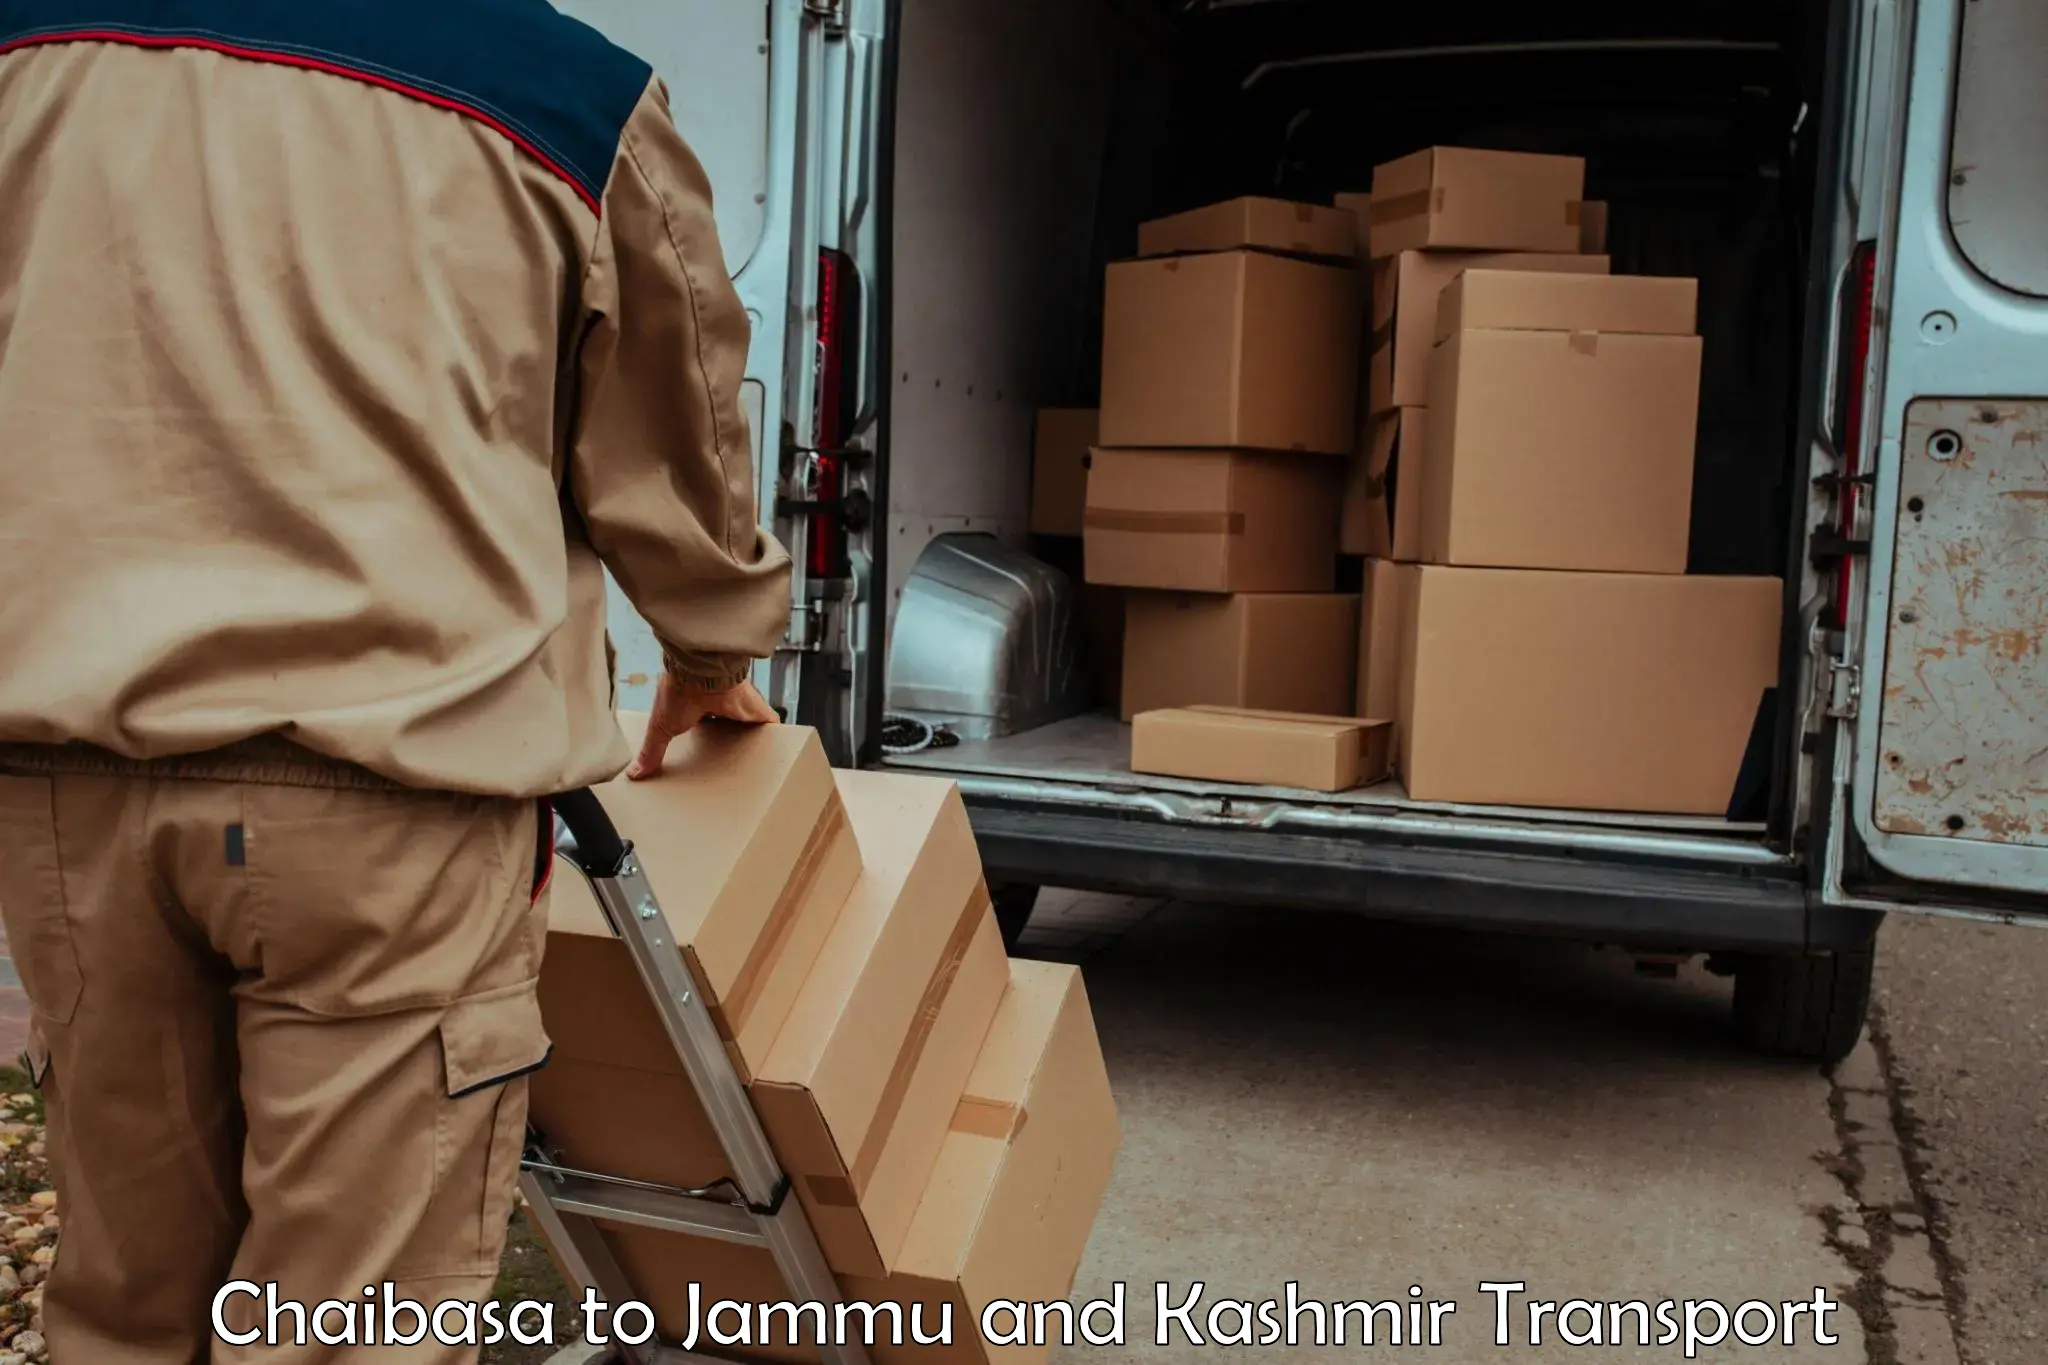 Daily transport service in Chaibasa to Jammu and Kashmir